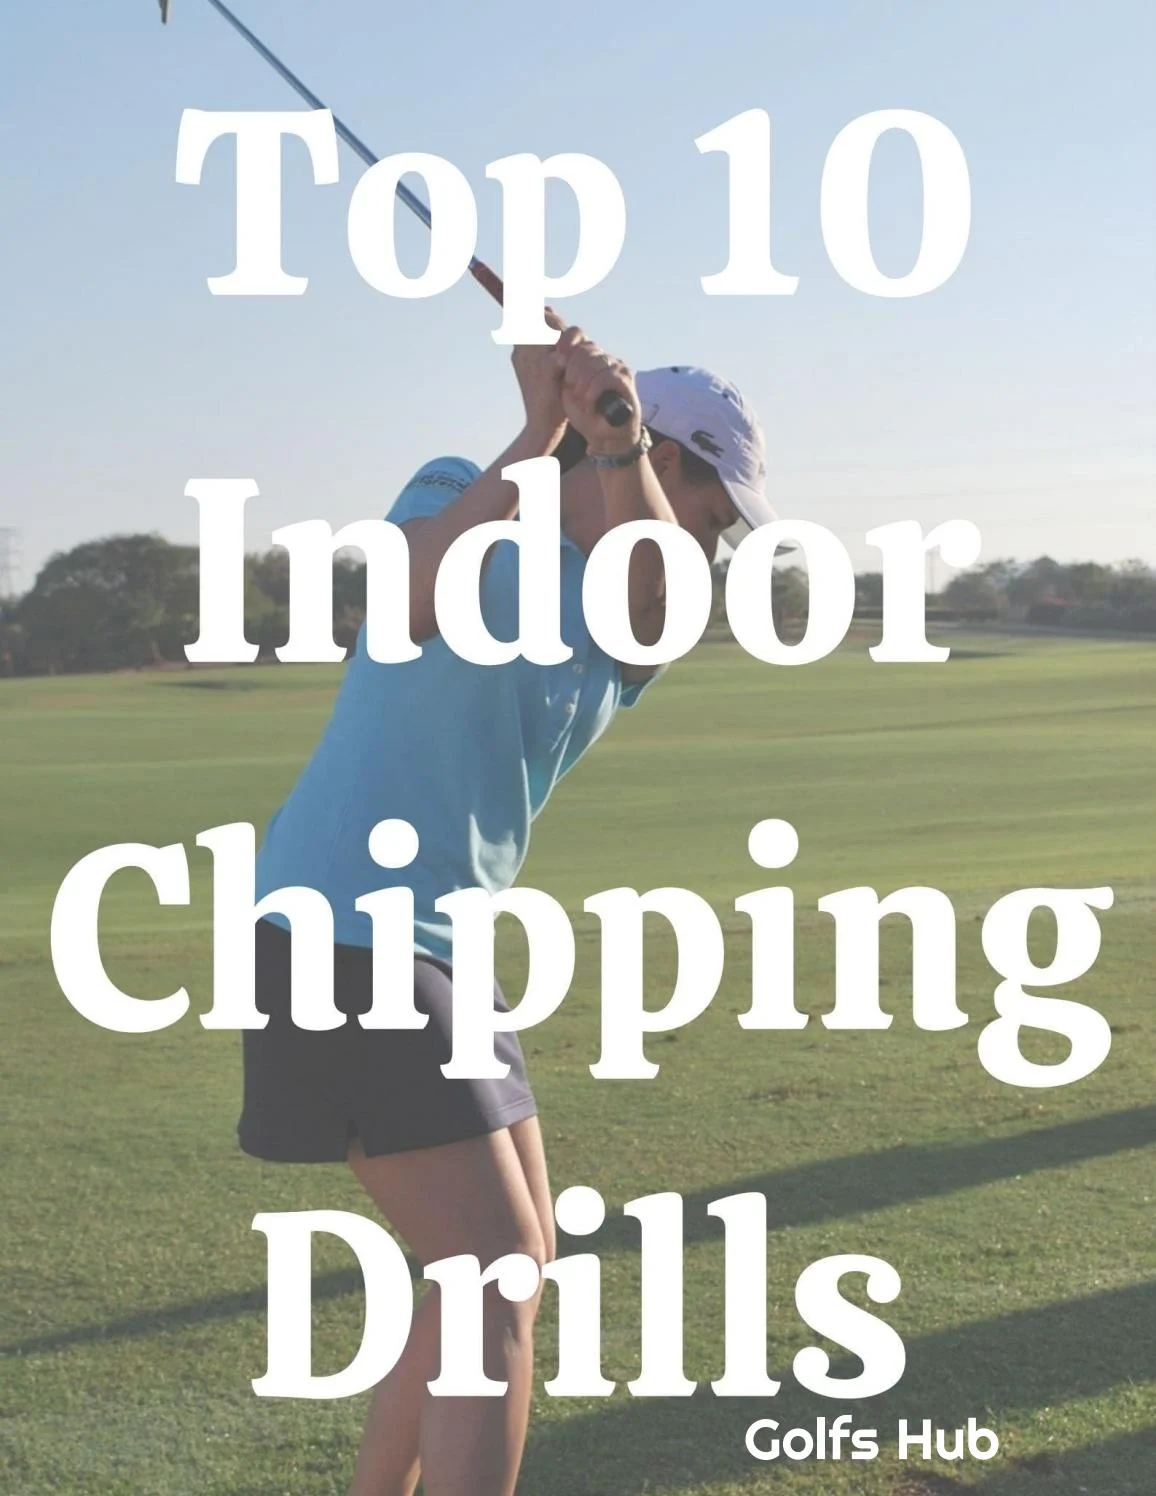 Drill #1: One-Handed Chipping